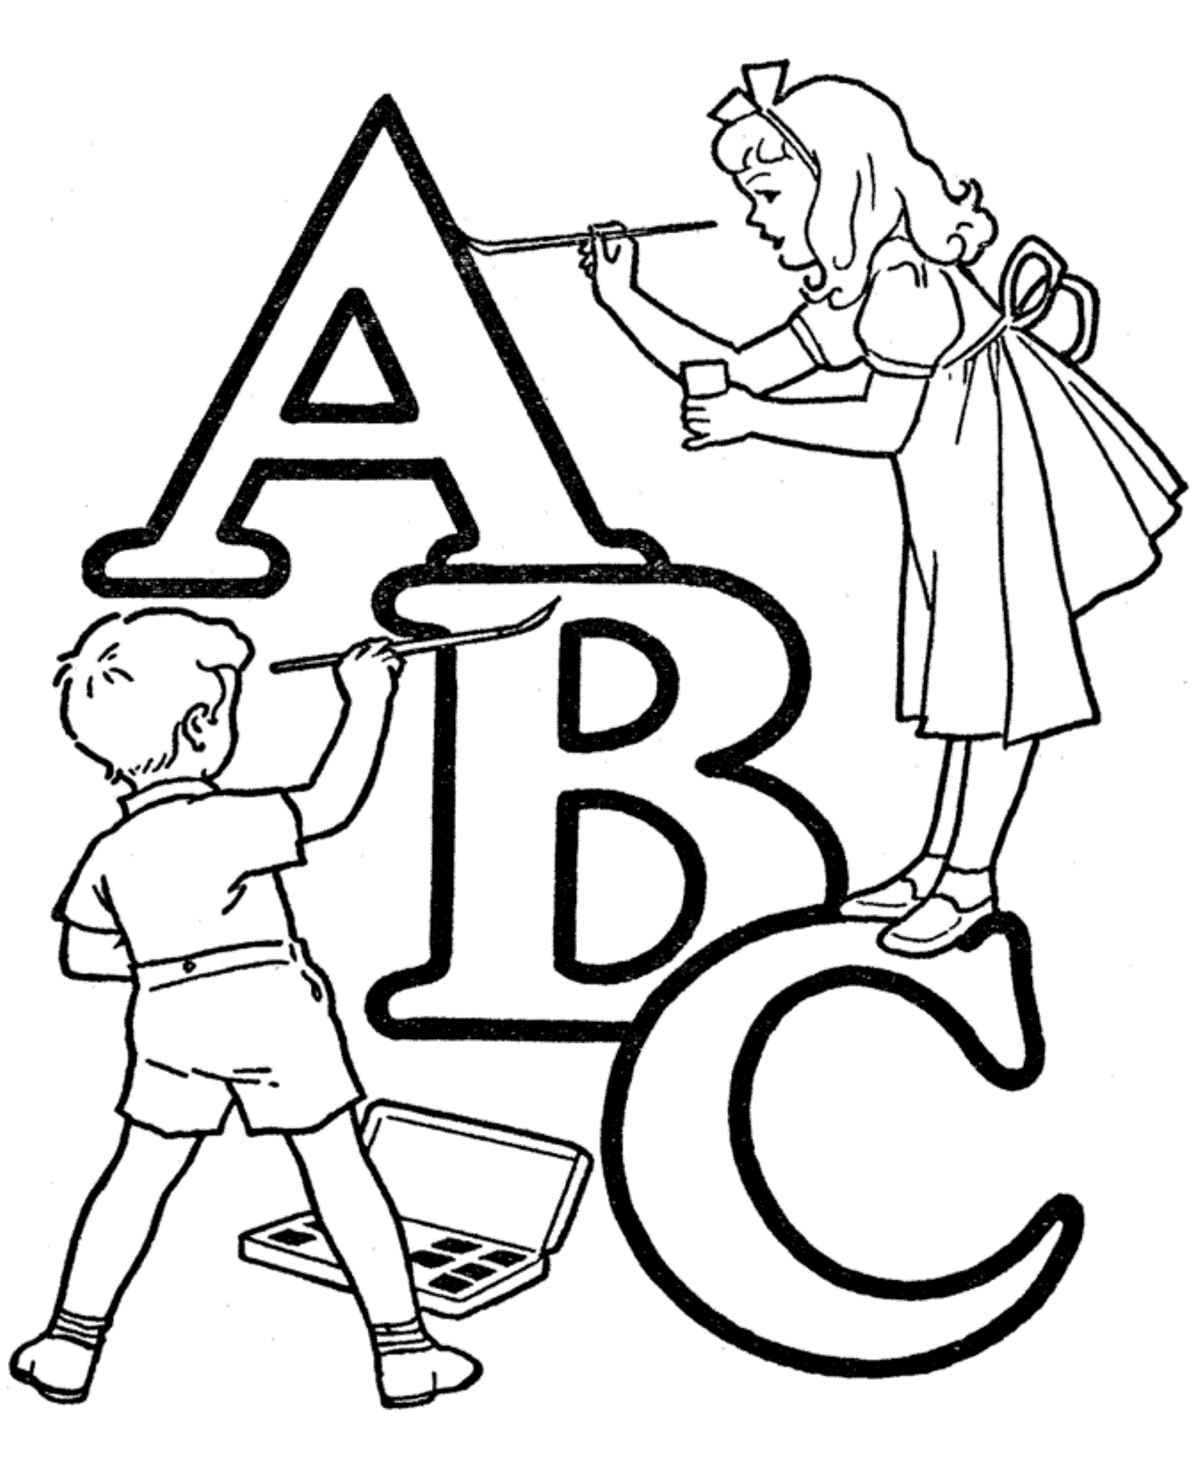 ABC Coloring Pages Educational ABC Printable 2020 0381 Coloring4free